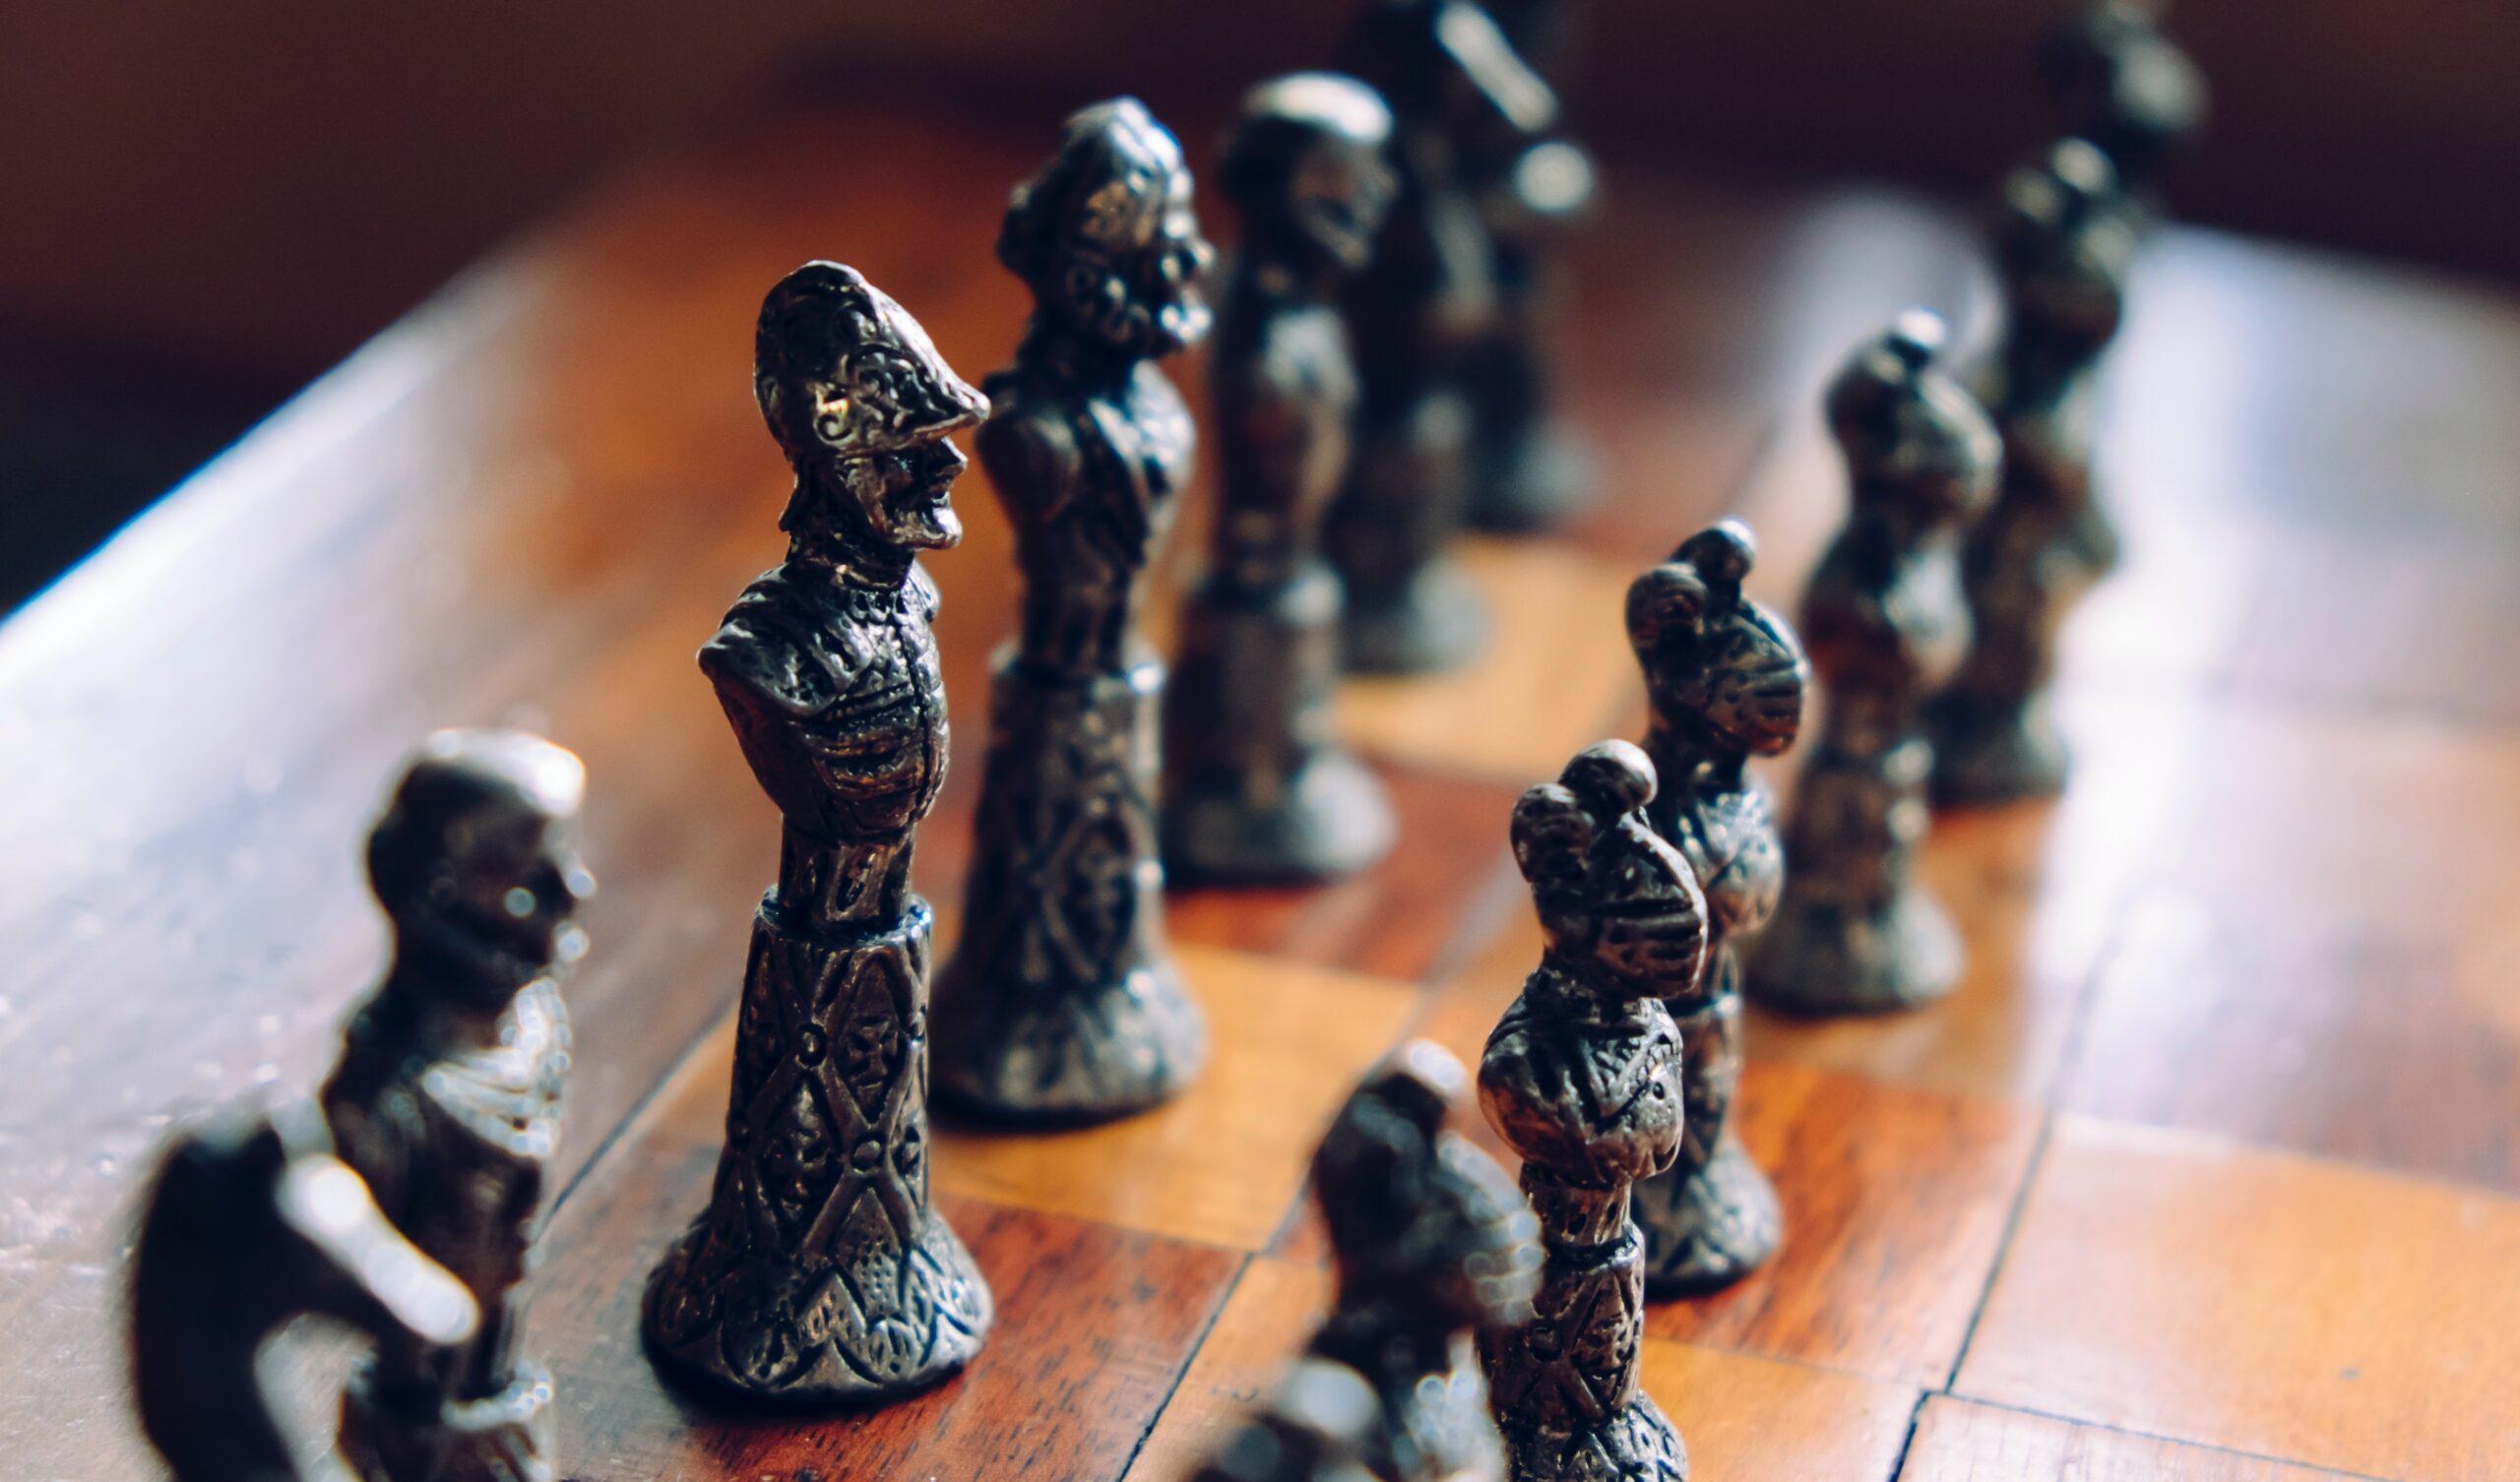 Ancient chess pieces on a chess board as part of an article about creating the ultimate sales playbook.